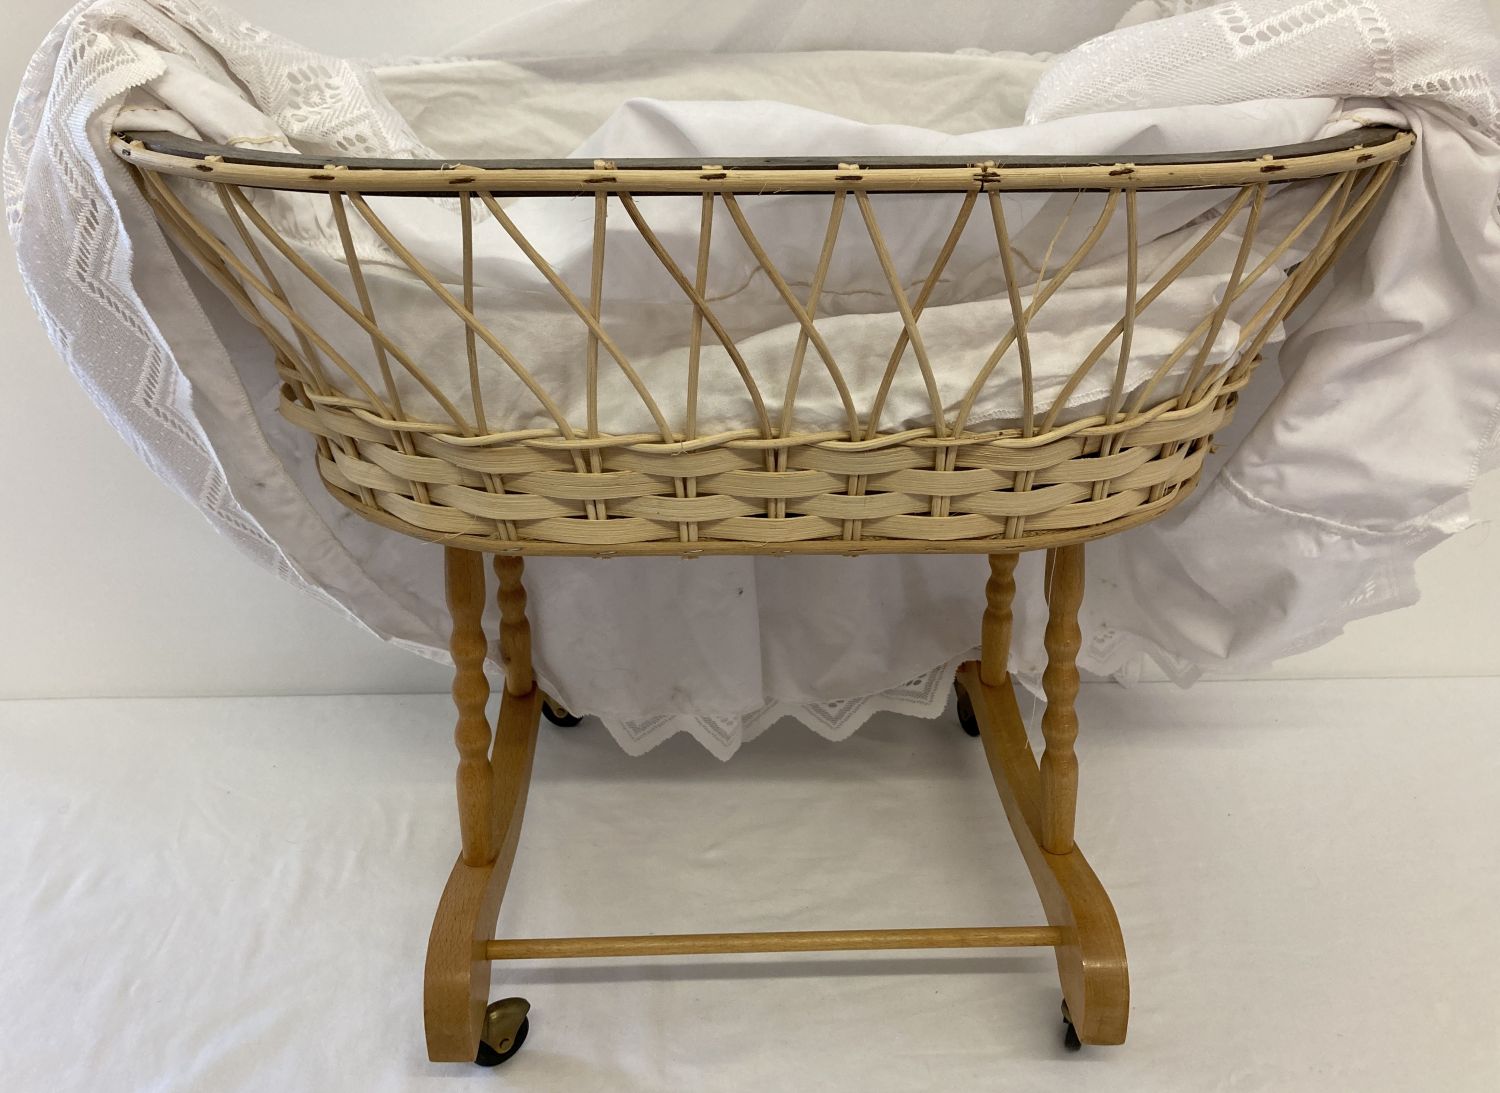 A modern wood and cane dolls crib on wheeled base. Complete with bedding and hanging drapes. - Image 3 of 3